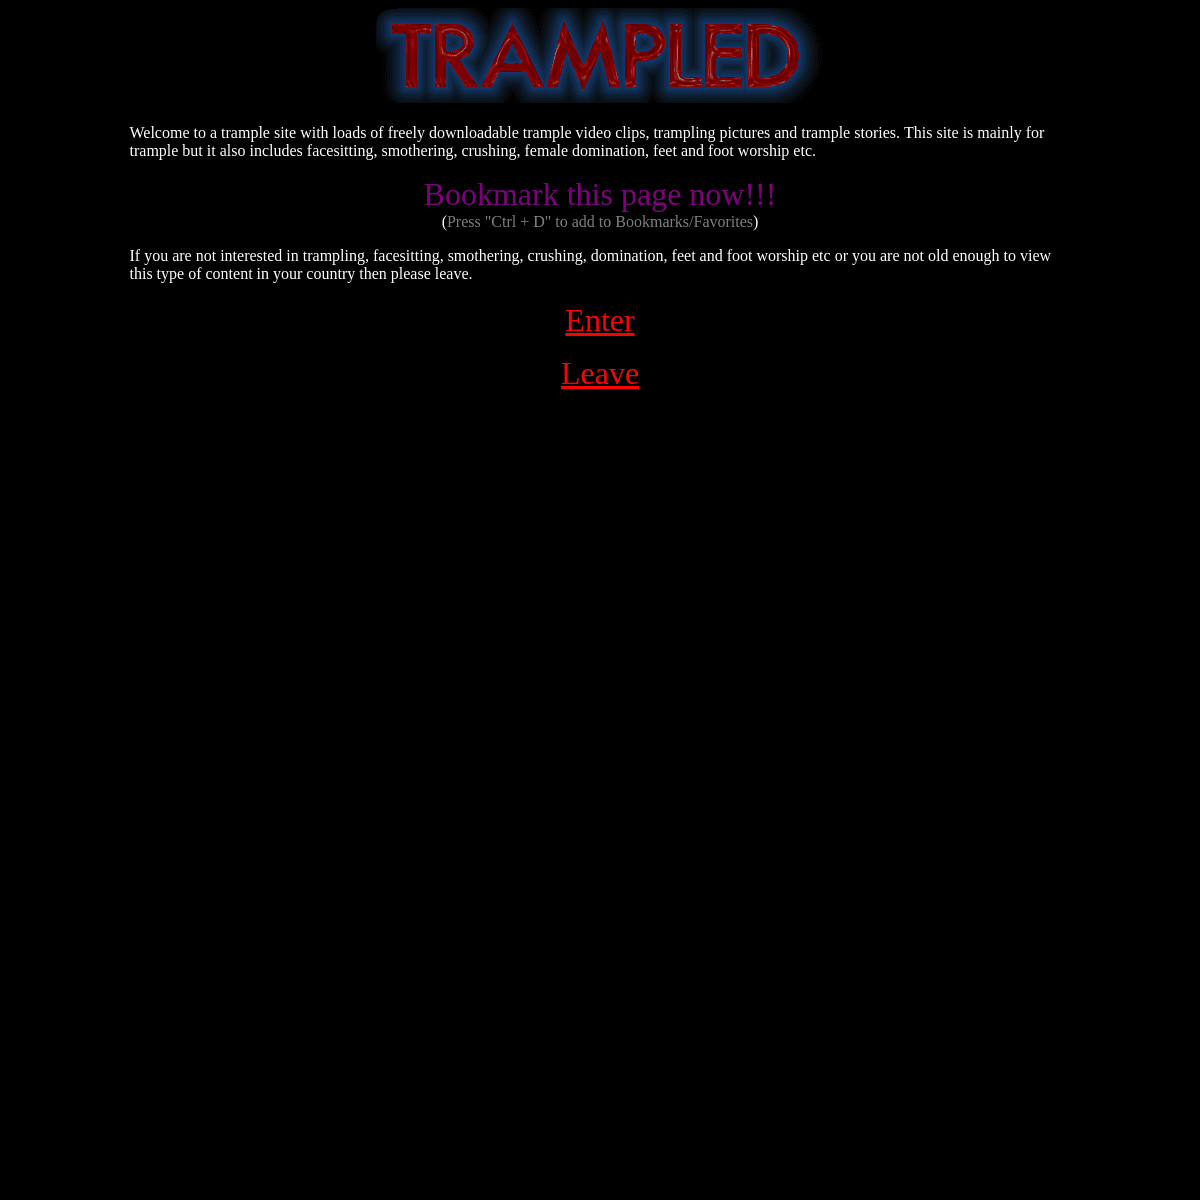 A complete backup of trampled.org